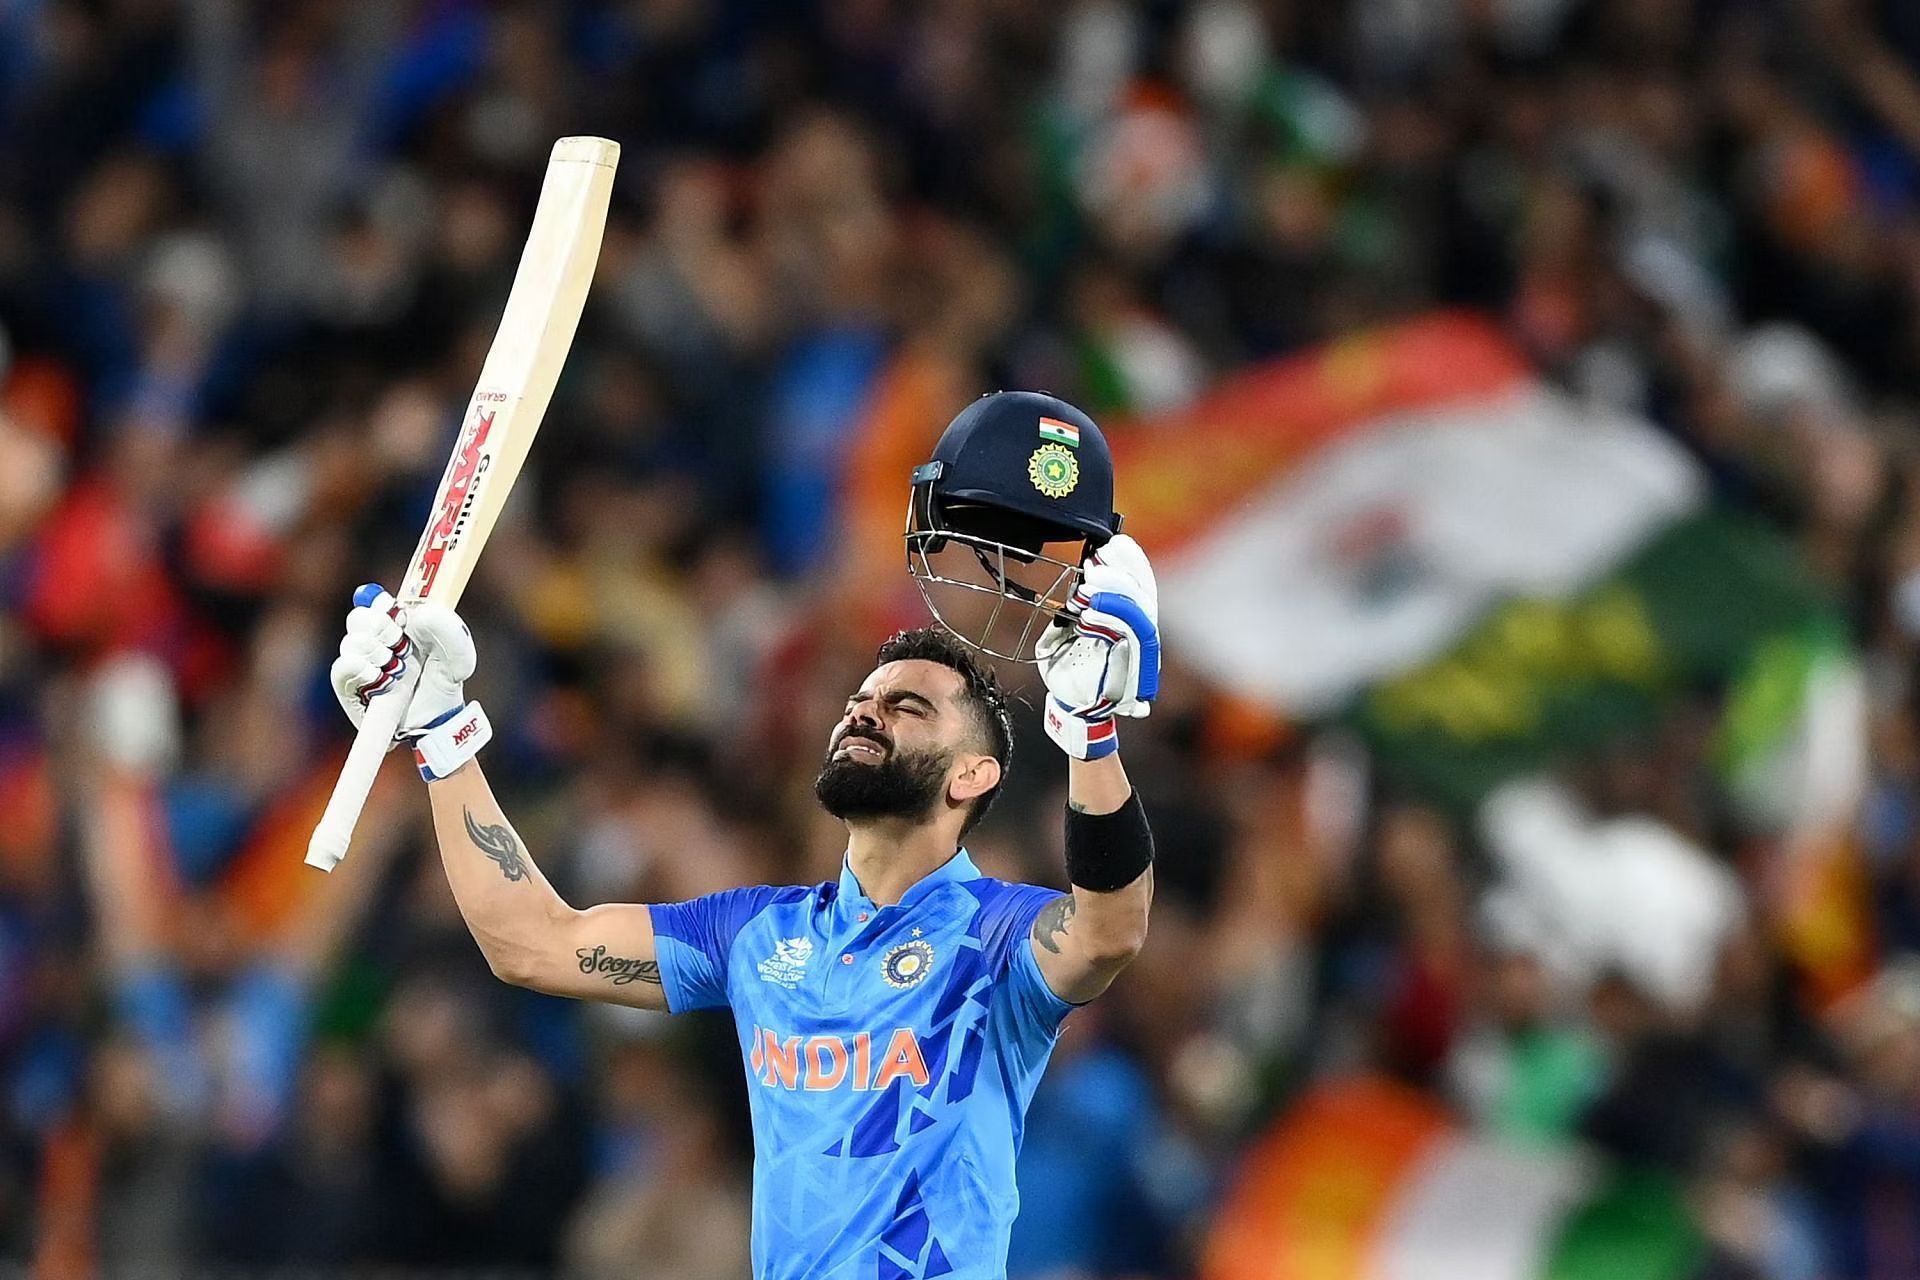 Ahead of the 2022 T20 World Cup in Australia, there were still some question marks over Kohli&rsquo;s form. However, the 34-year-old answered critics in fitting style, clobbering a sensational 82* off 53 balls against Pakistan at the MCG. The No. 3 batter slammed six fours and four sixes to pull off an improbable triumph for India in a chase of 160 after they seemed down and out at 31/4. (Pic: Getty Images)